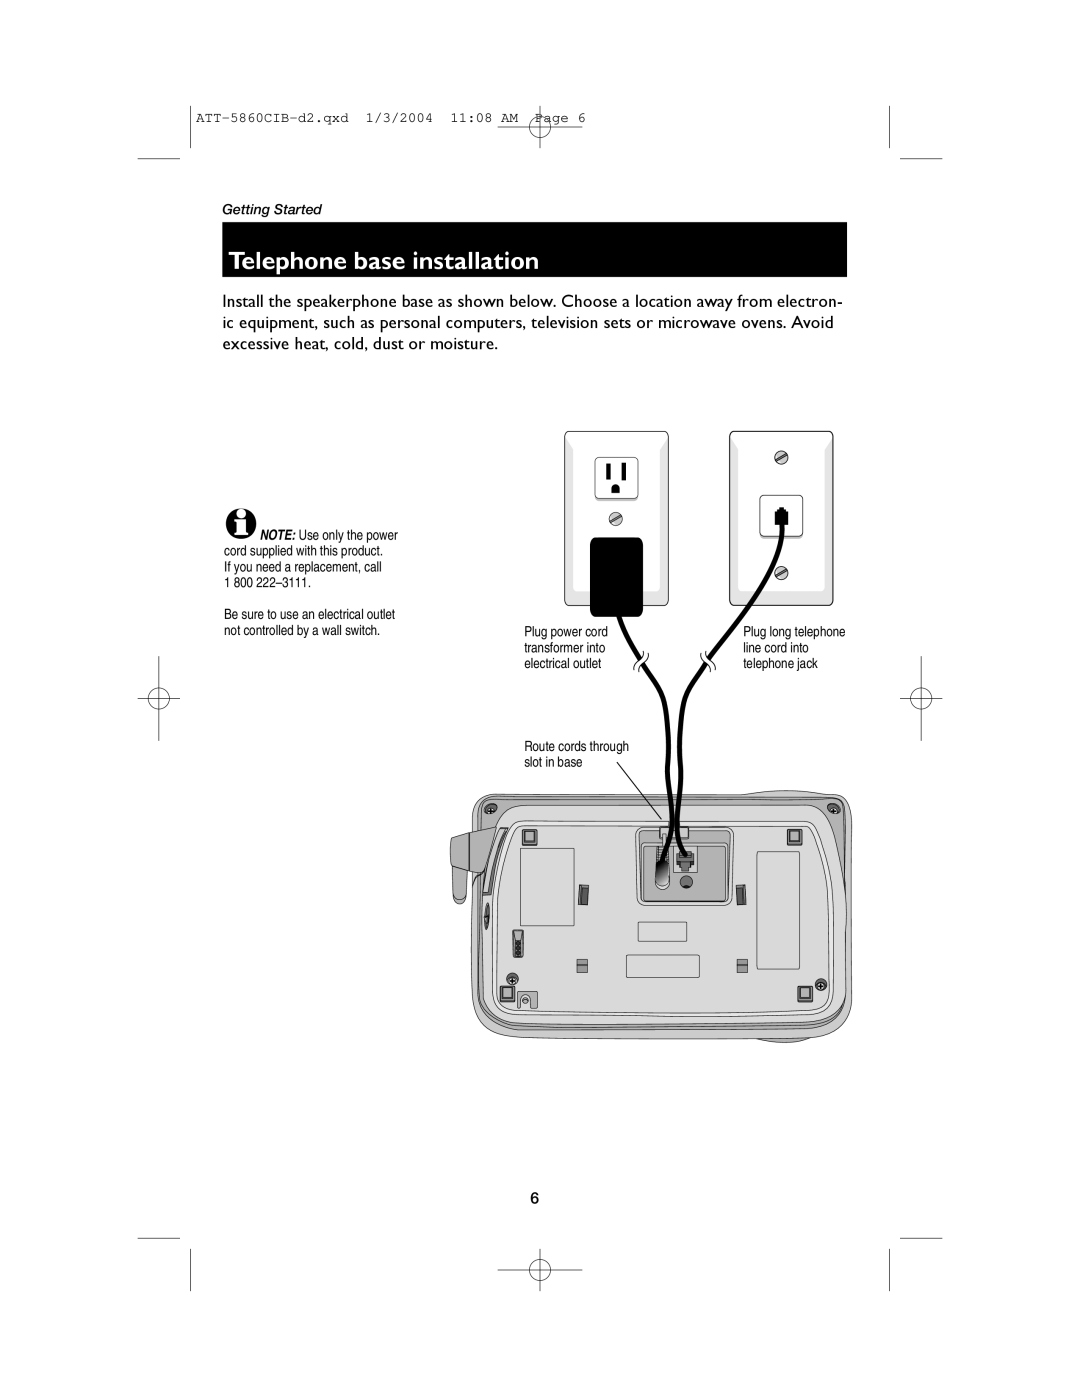 AT&T E5860 user manual Telephone base installation, Plug power cord, transformer into, line cord into, electrical outlet 